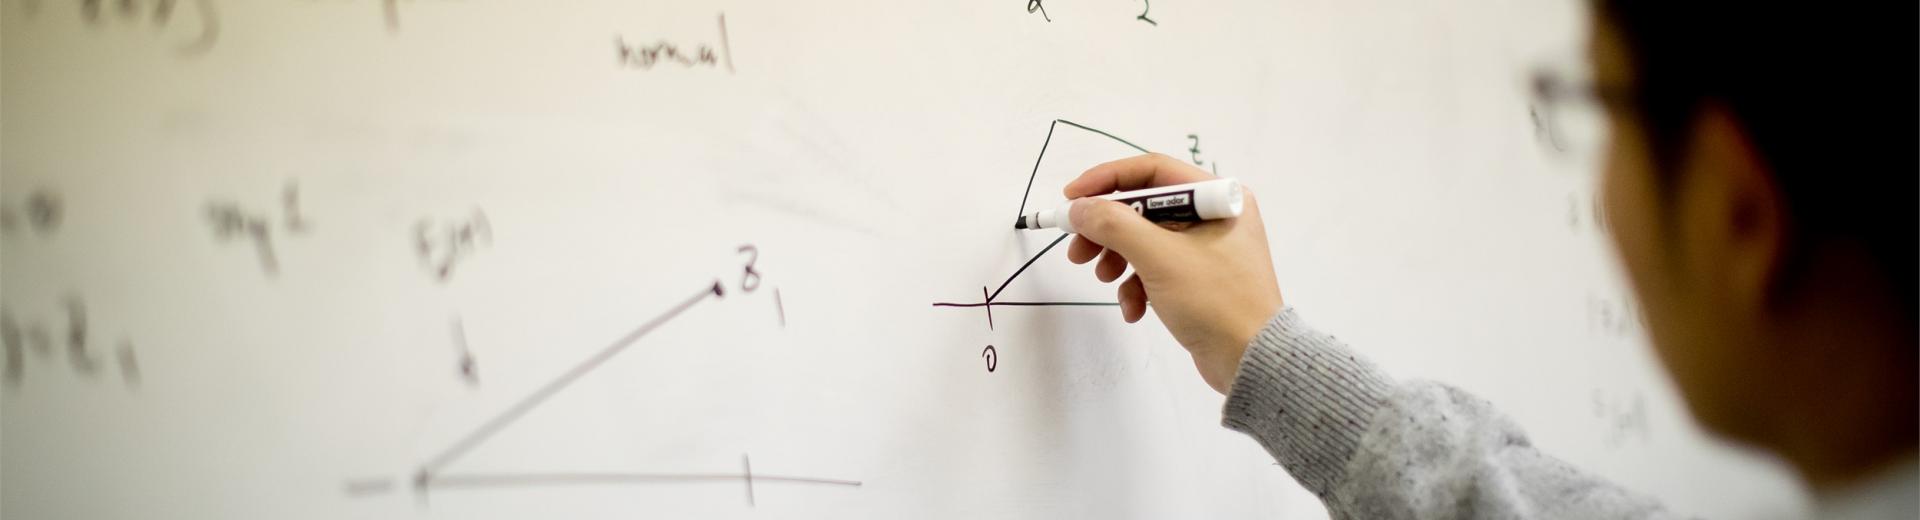 Temple student working out a math equation on a white board.